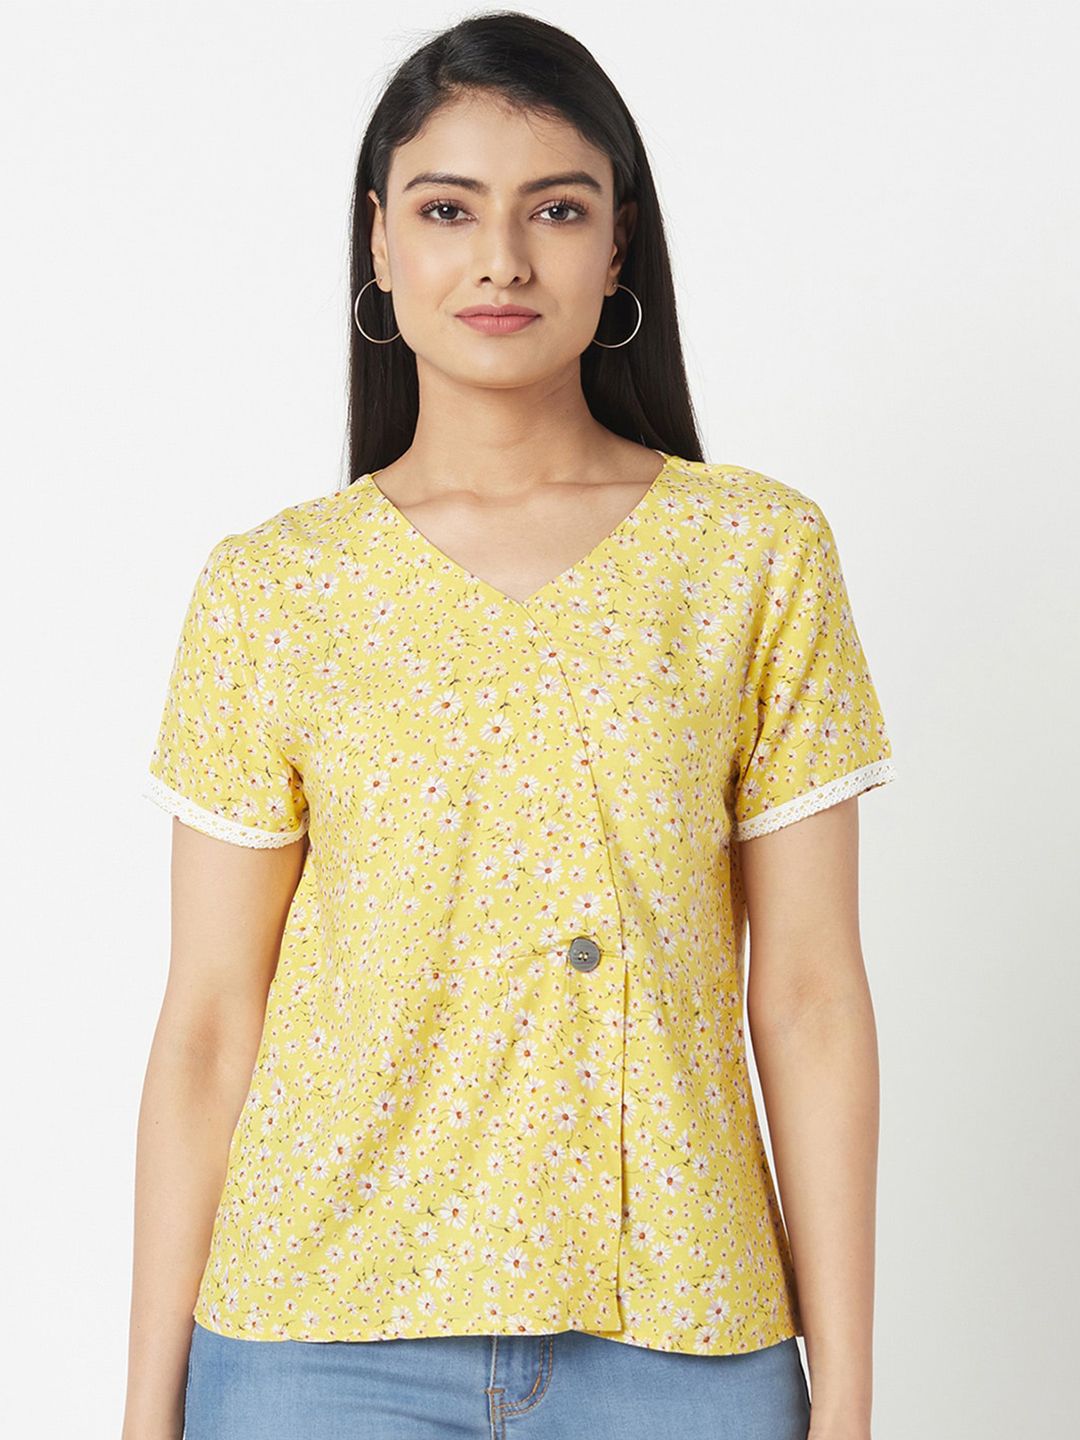 Miss Grace Floral Printed V Neck Top Price in India